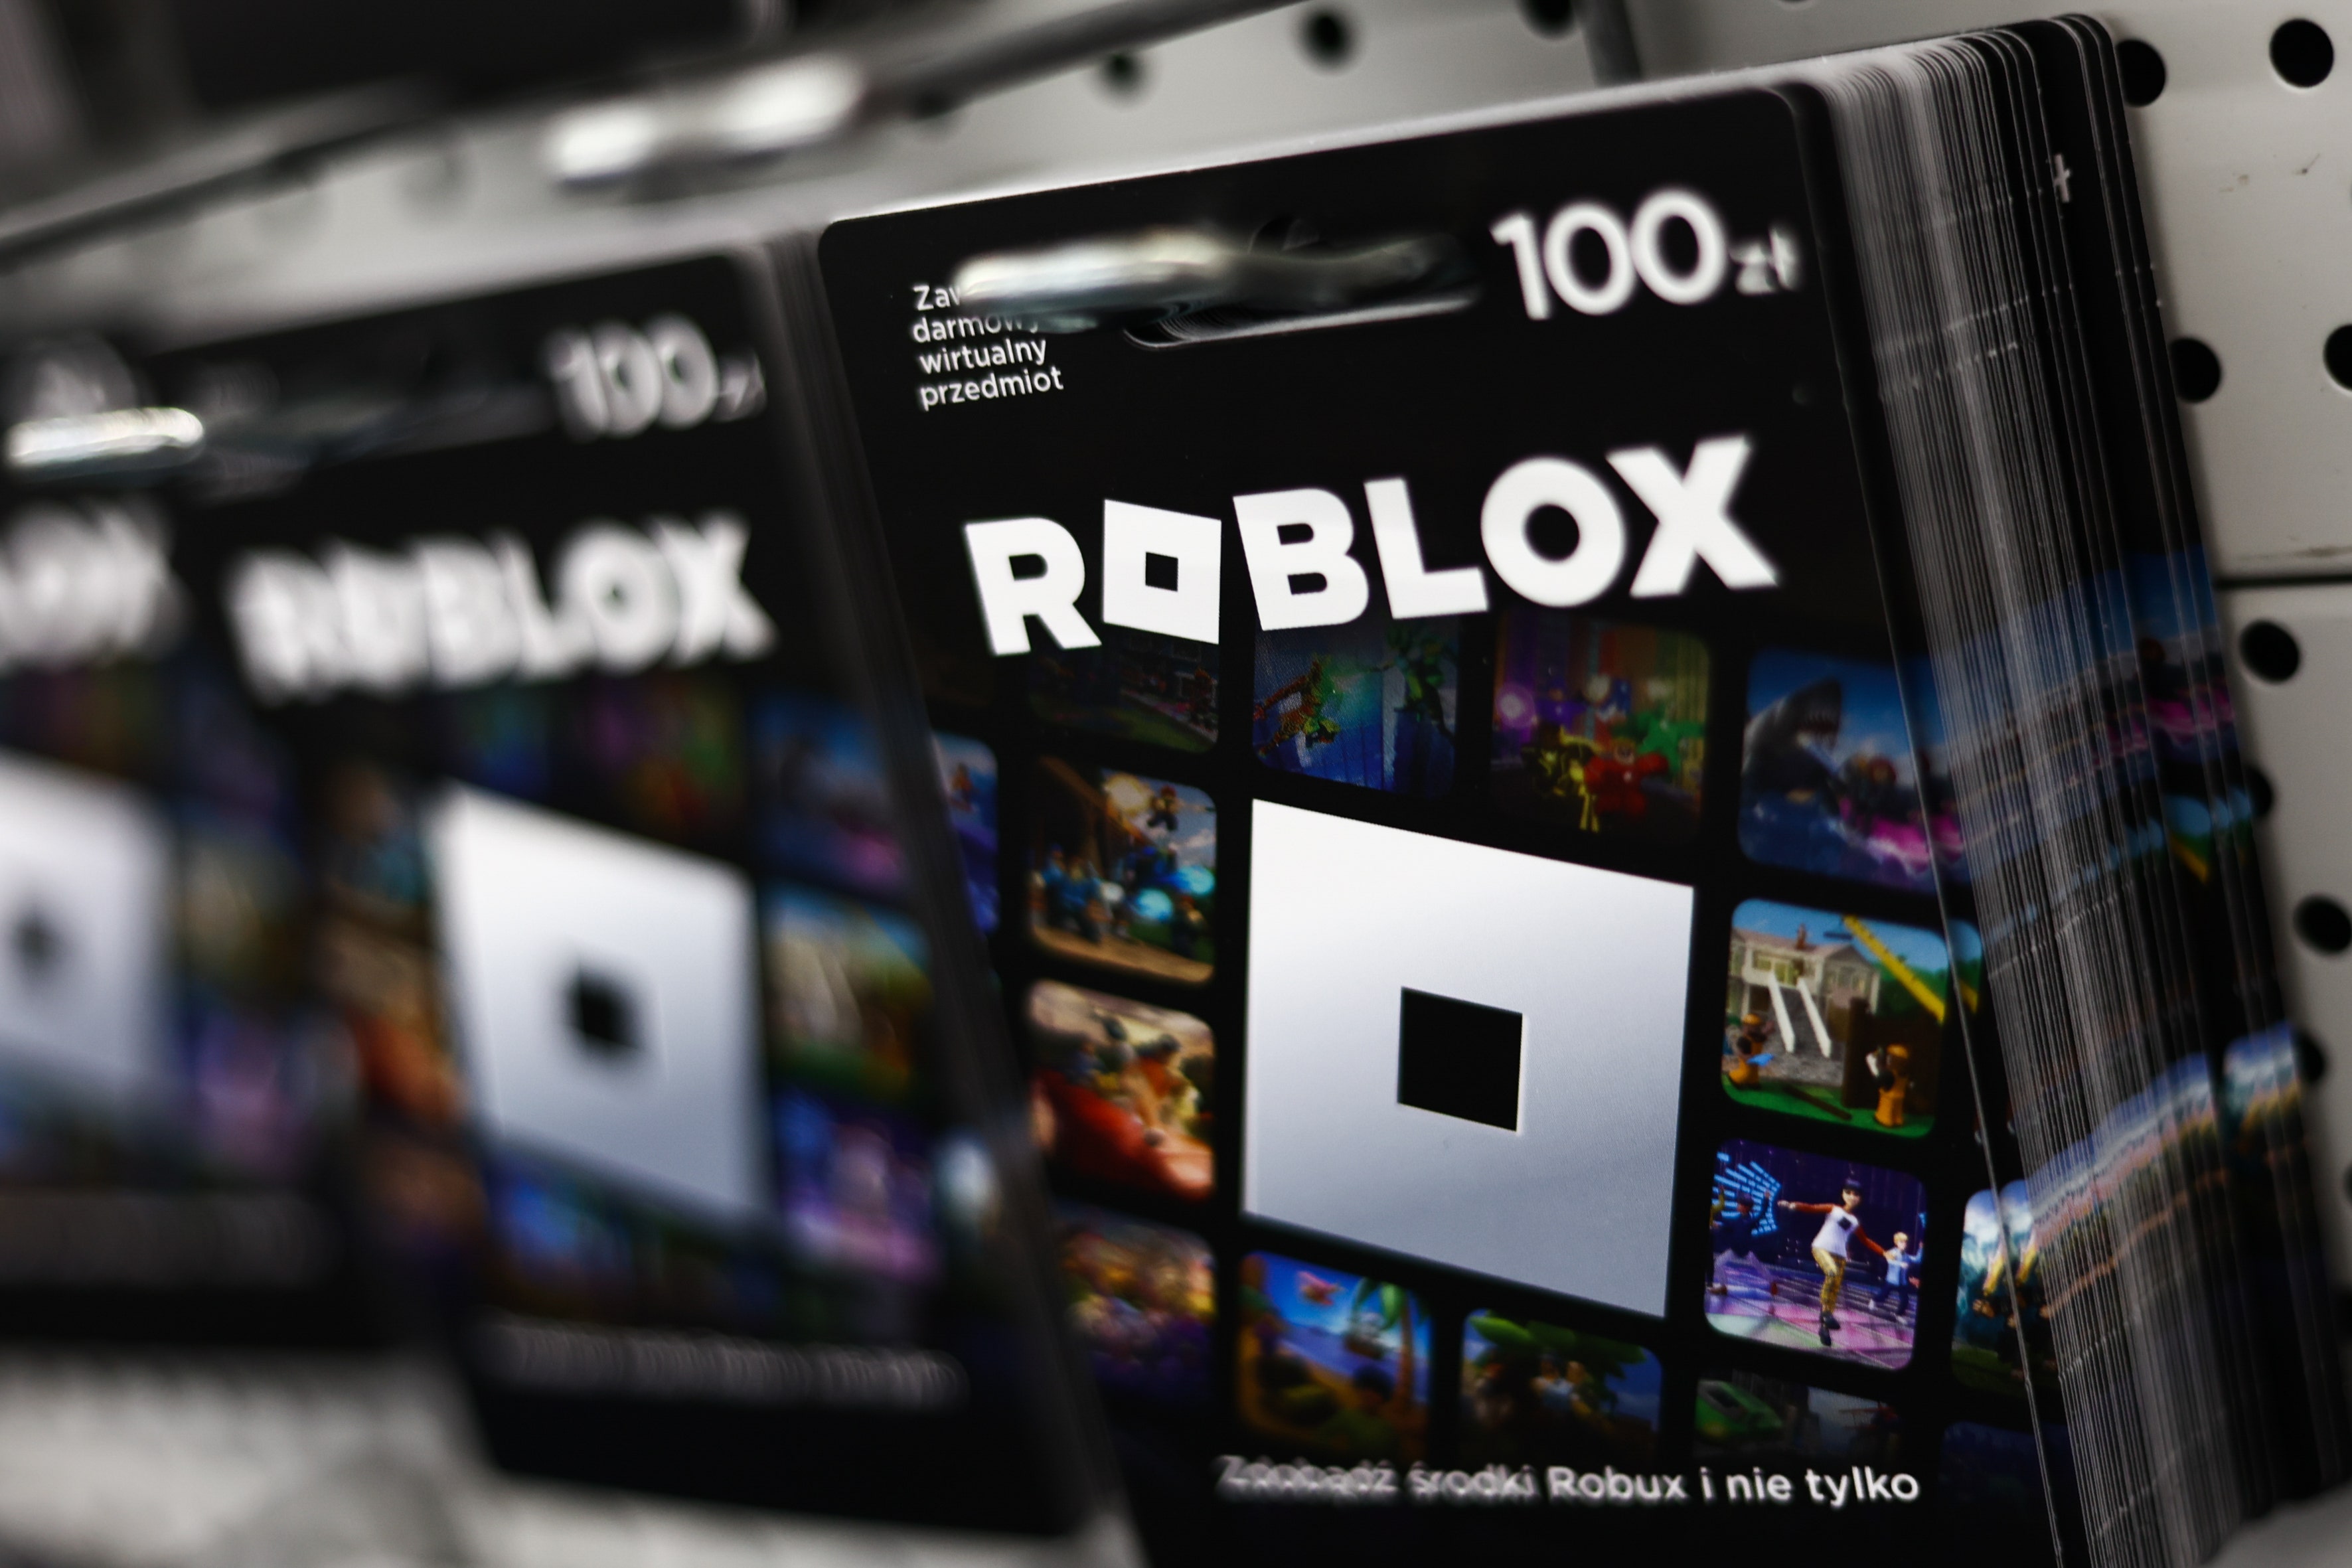 roblox log in with another device｜TikTok Search